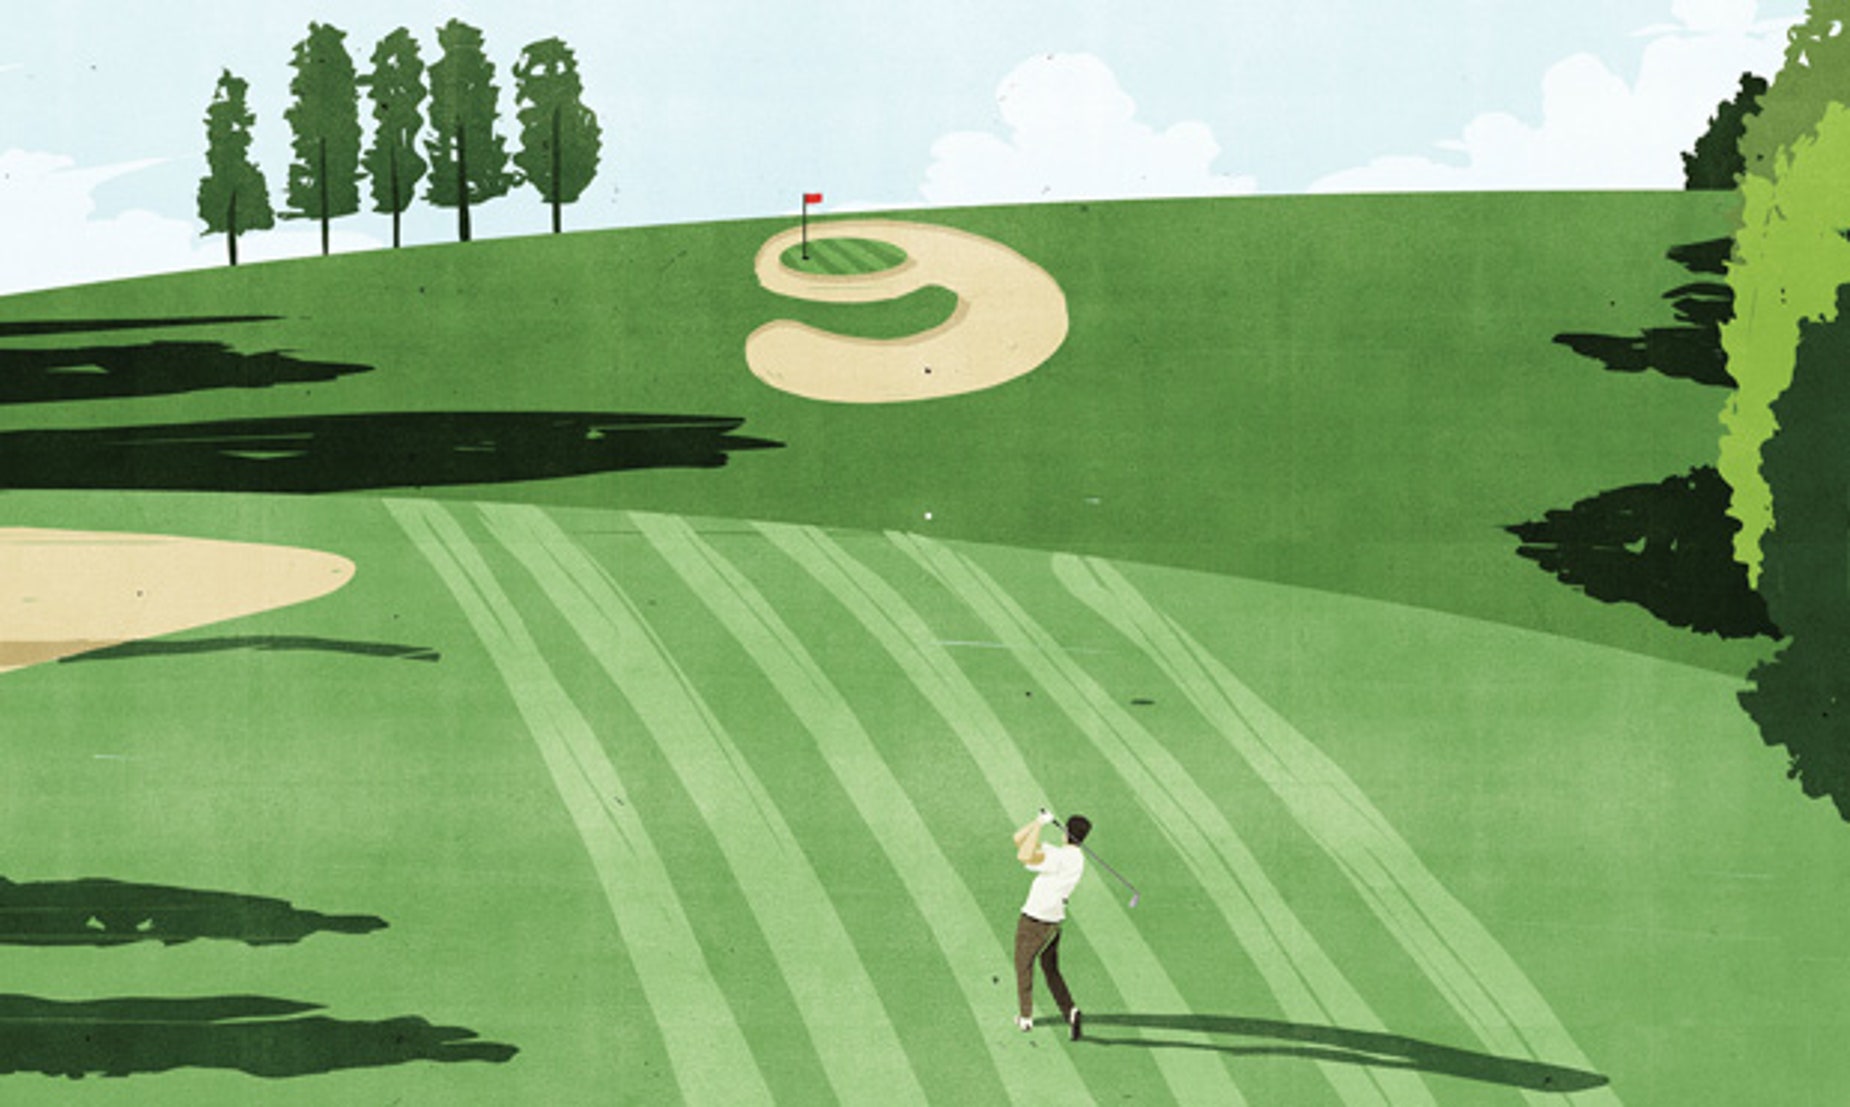 A landscape illustration of a golf course. A man stands in the foreground swinging a club. Towards the back of the image, there is a sand bunker shaped like the number 9.